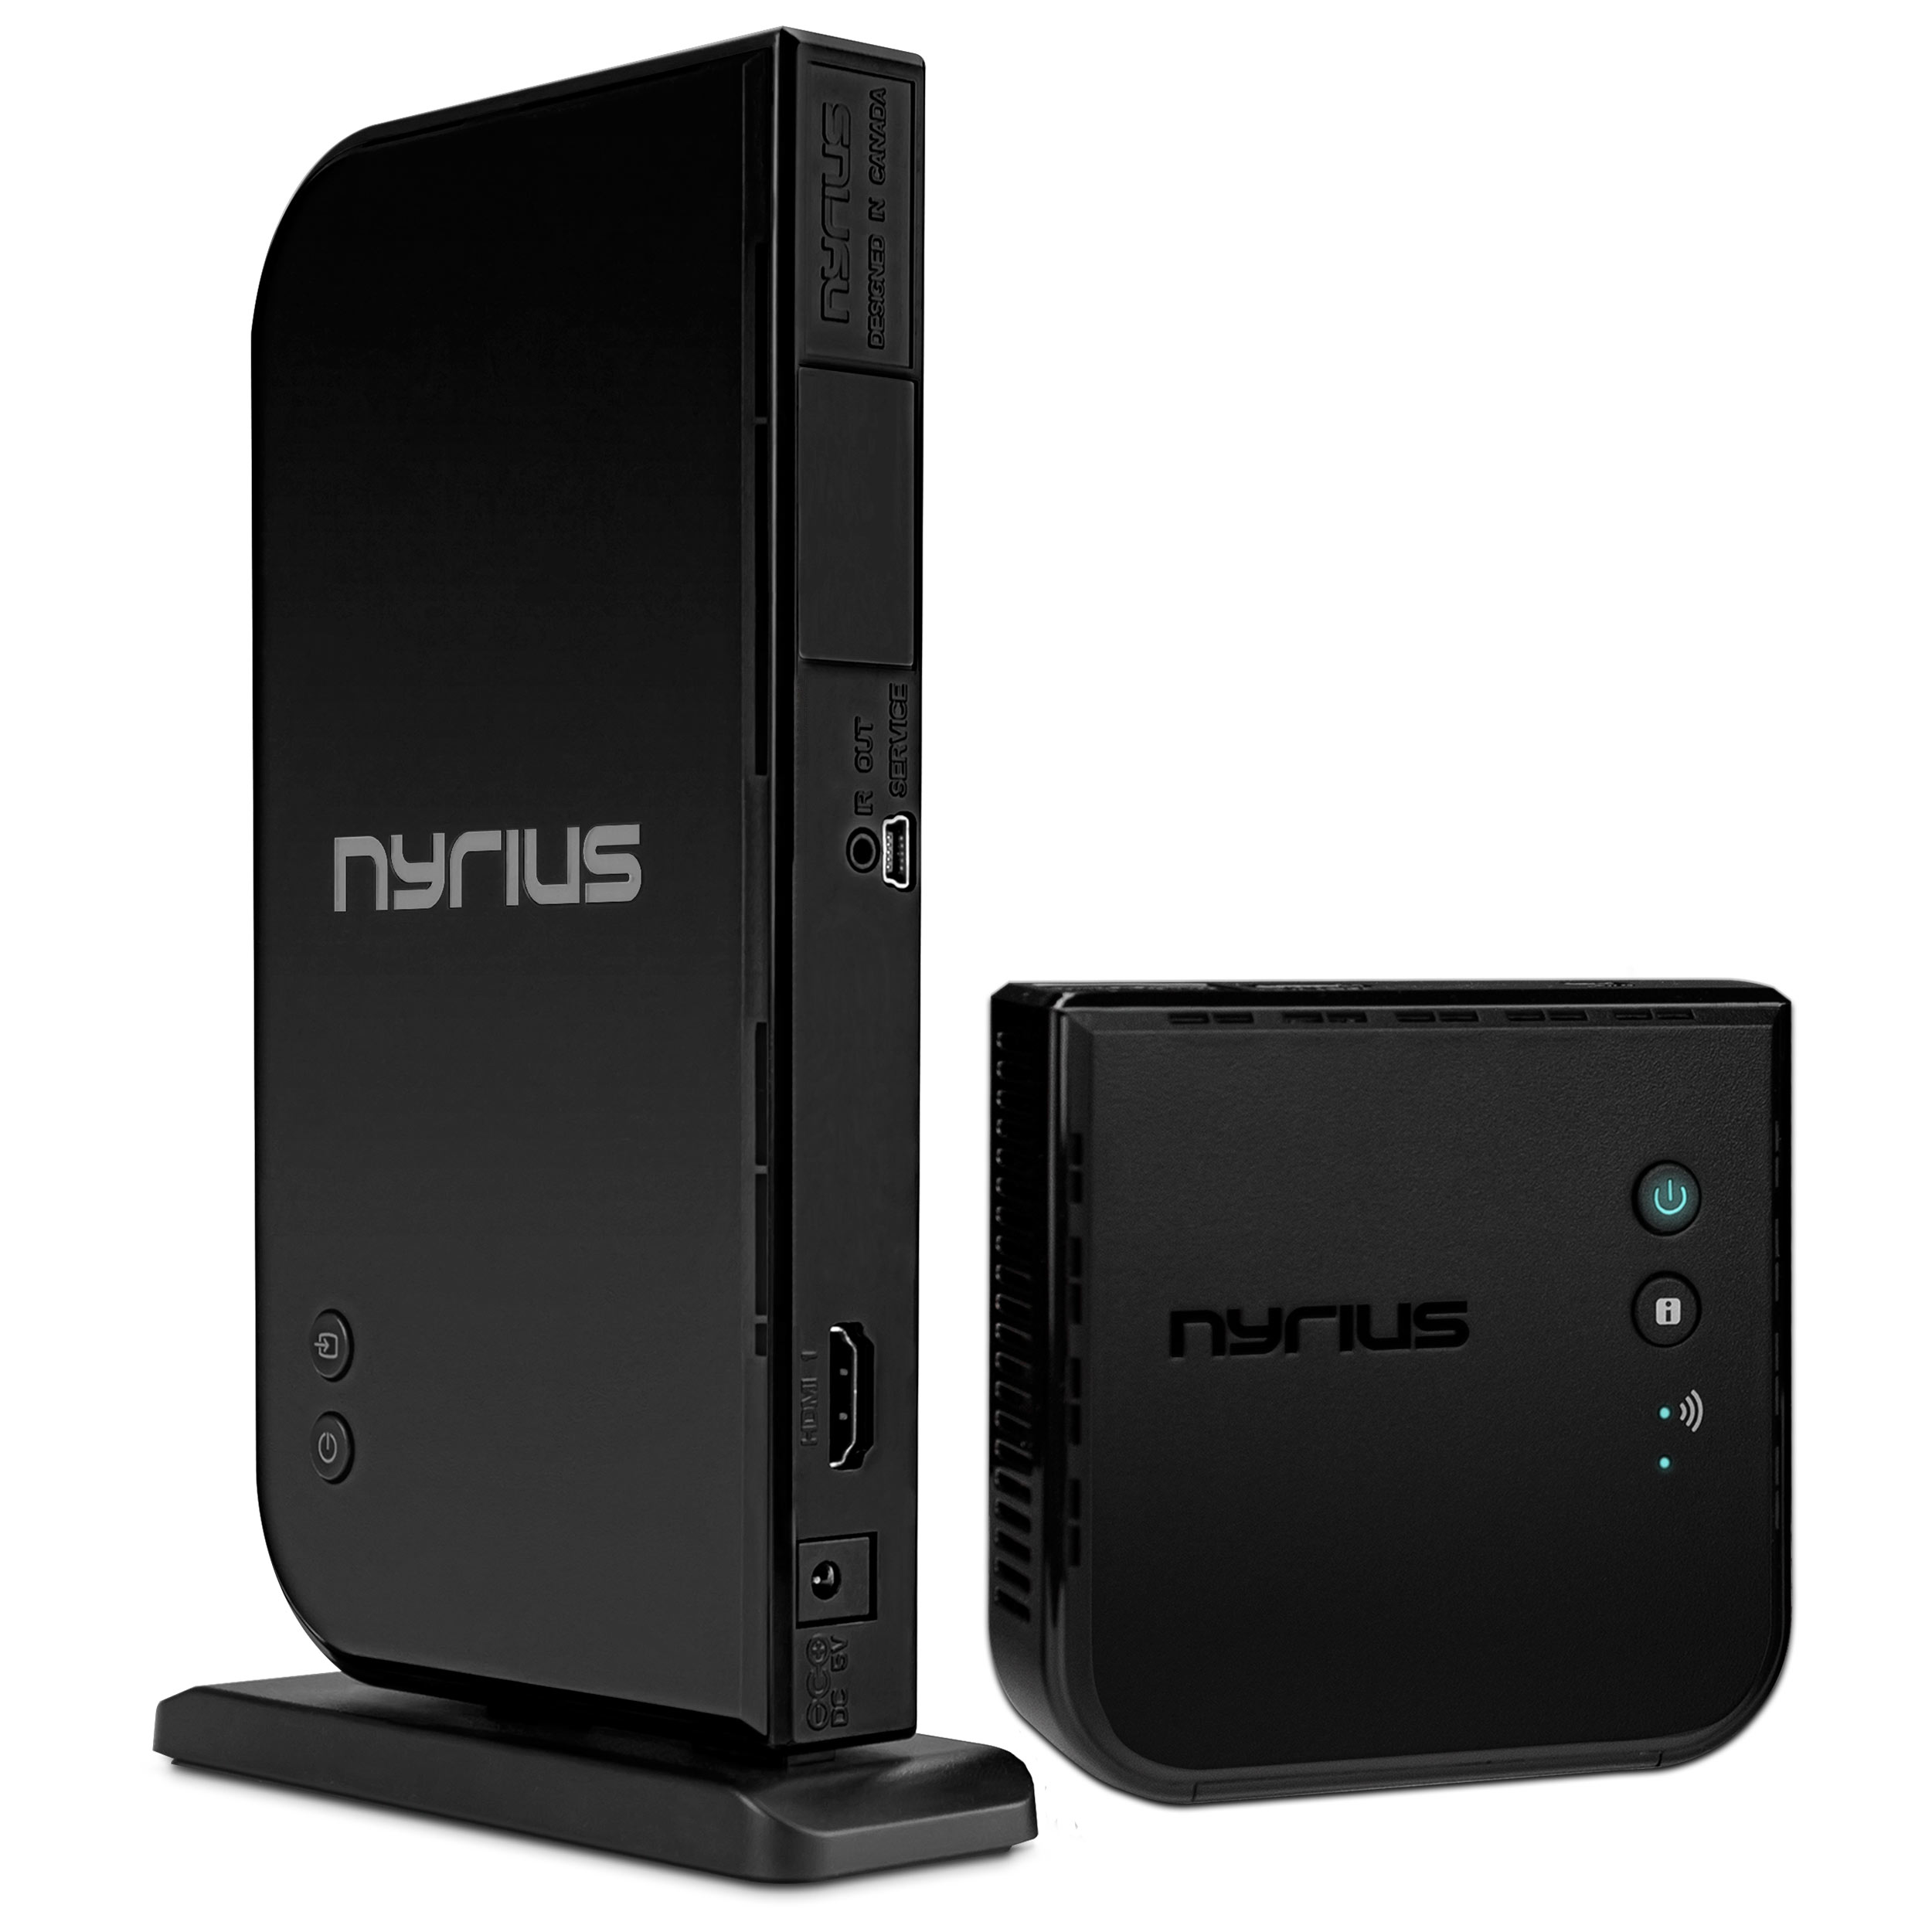 Nyrius ARIES Home HDMI Digital Wireless Transmitter & Receiver for HD 1080p Video Streaming (NAVS500)